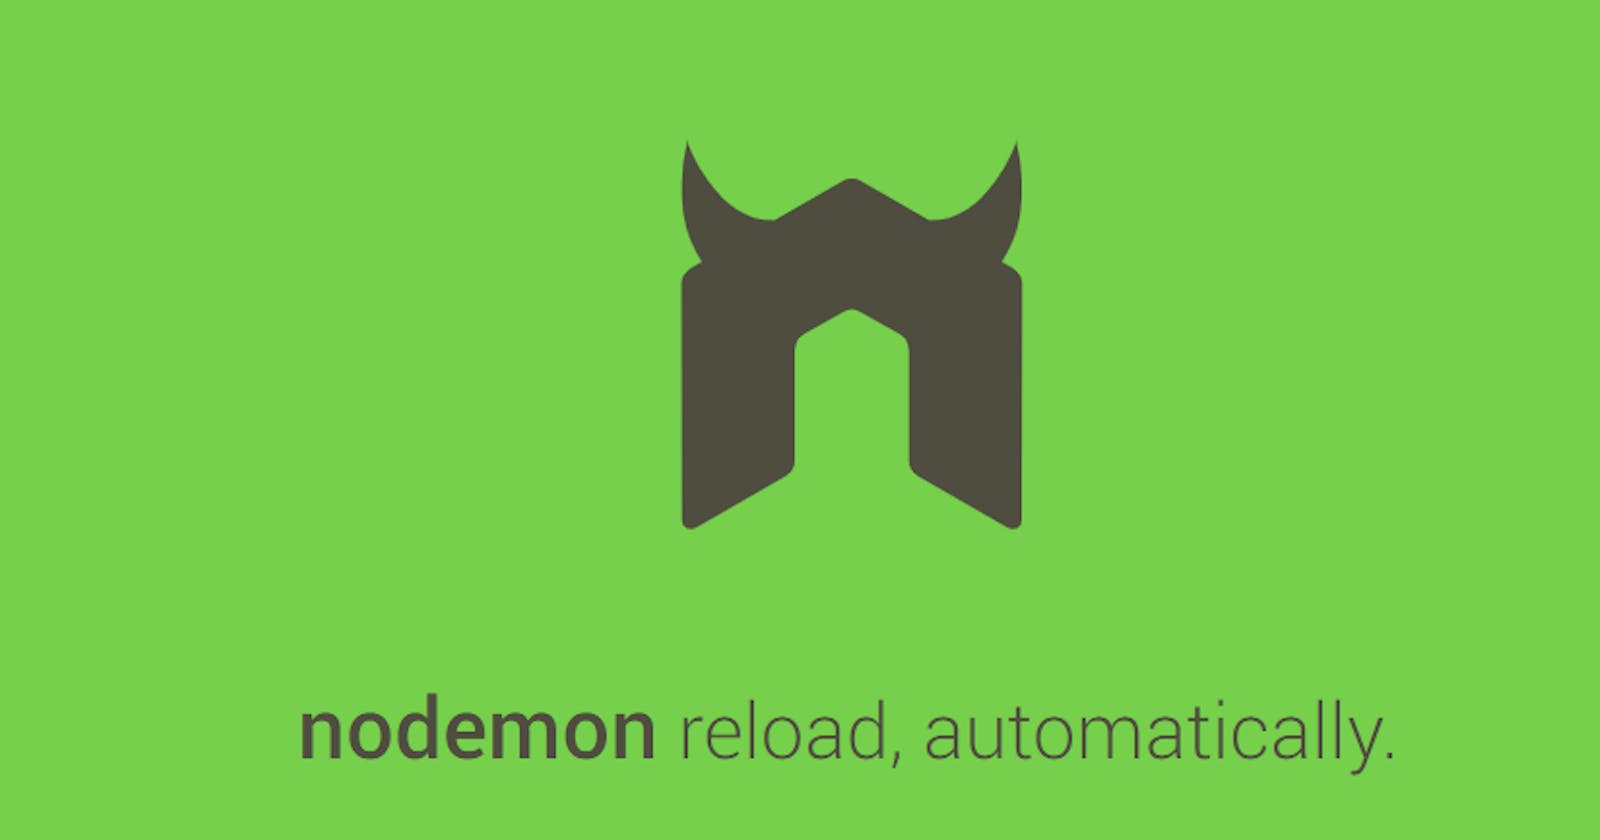 How to install Nodemon to your node apps